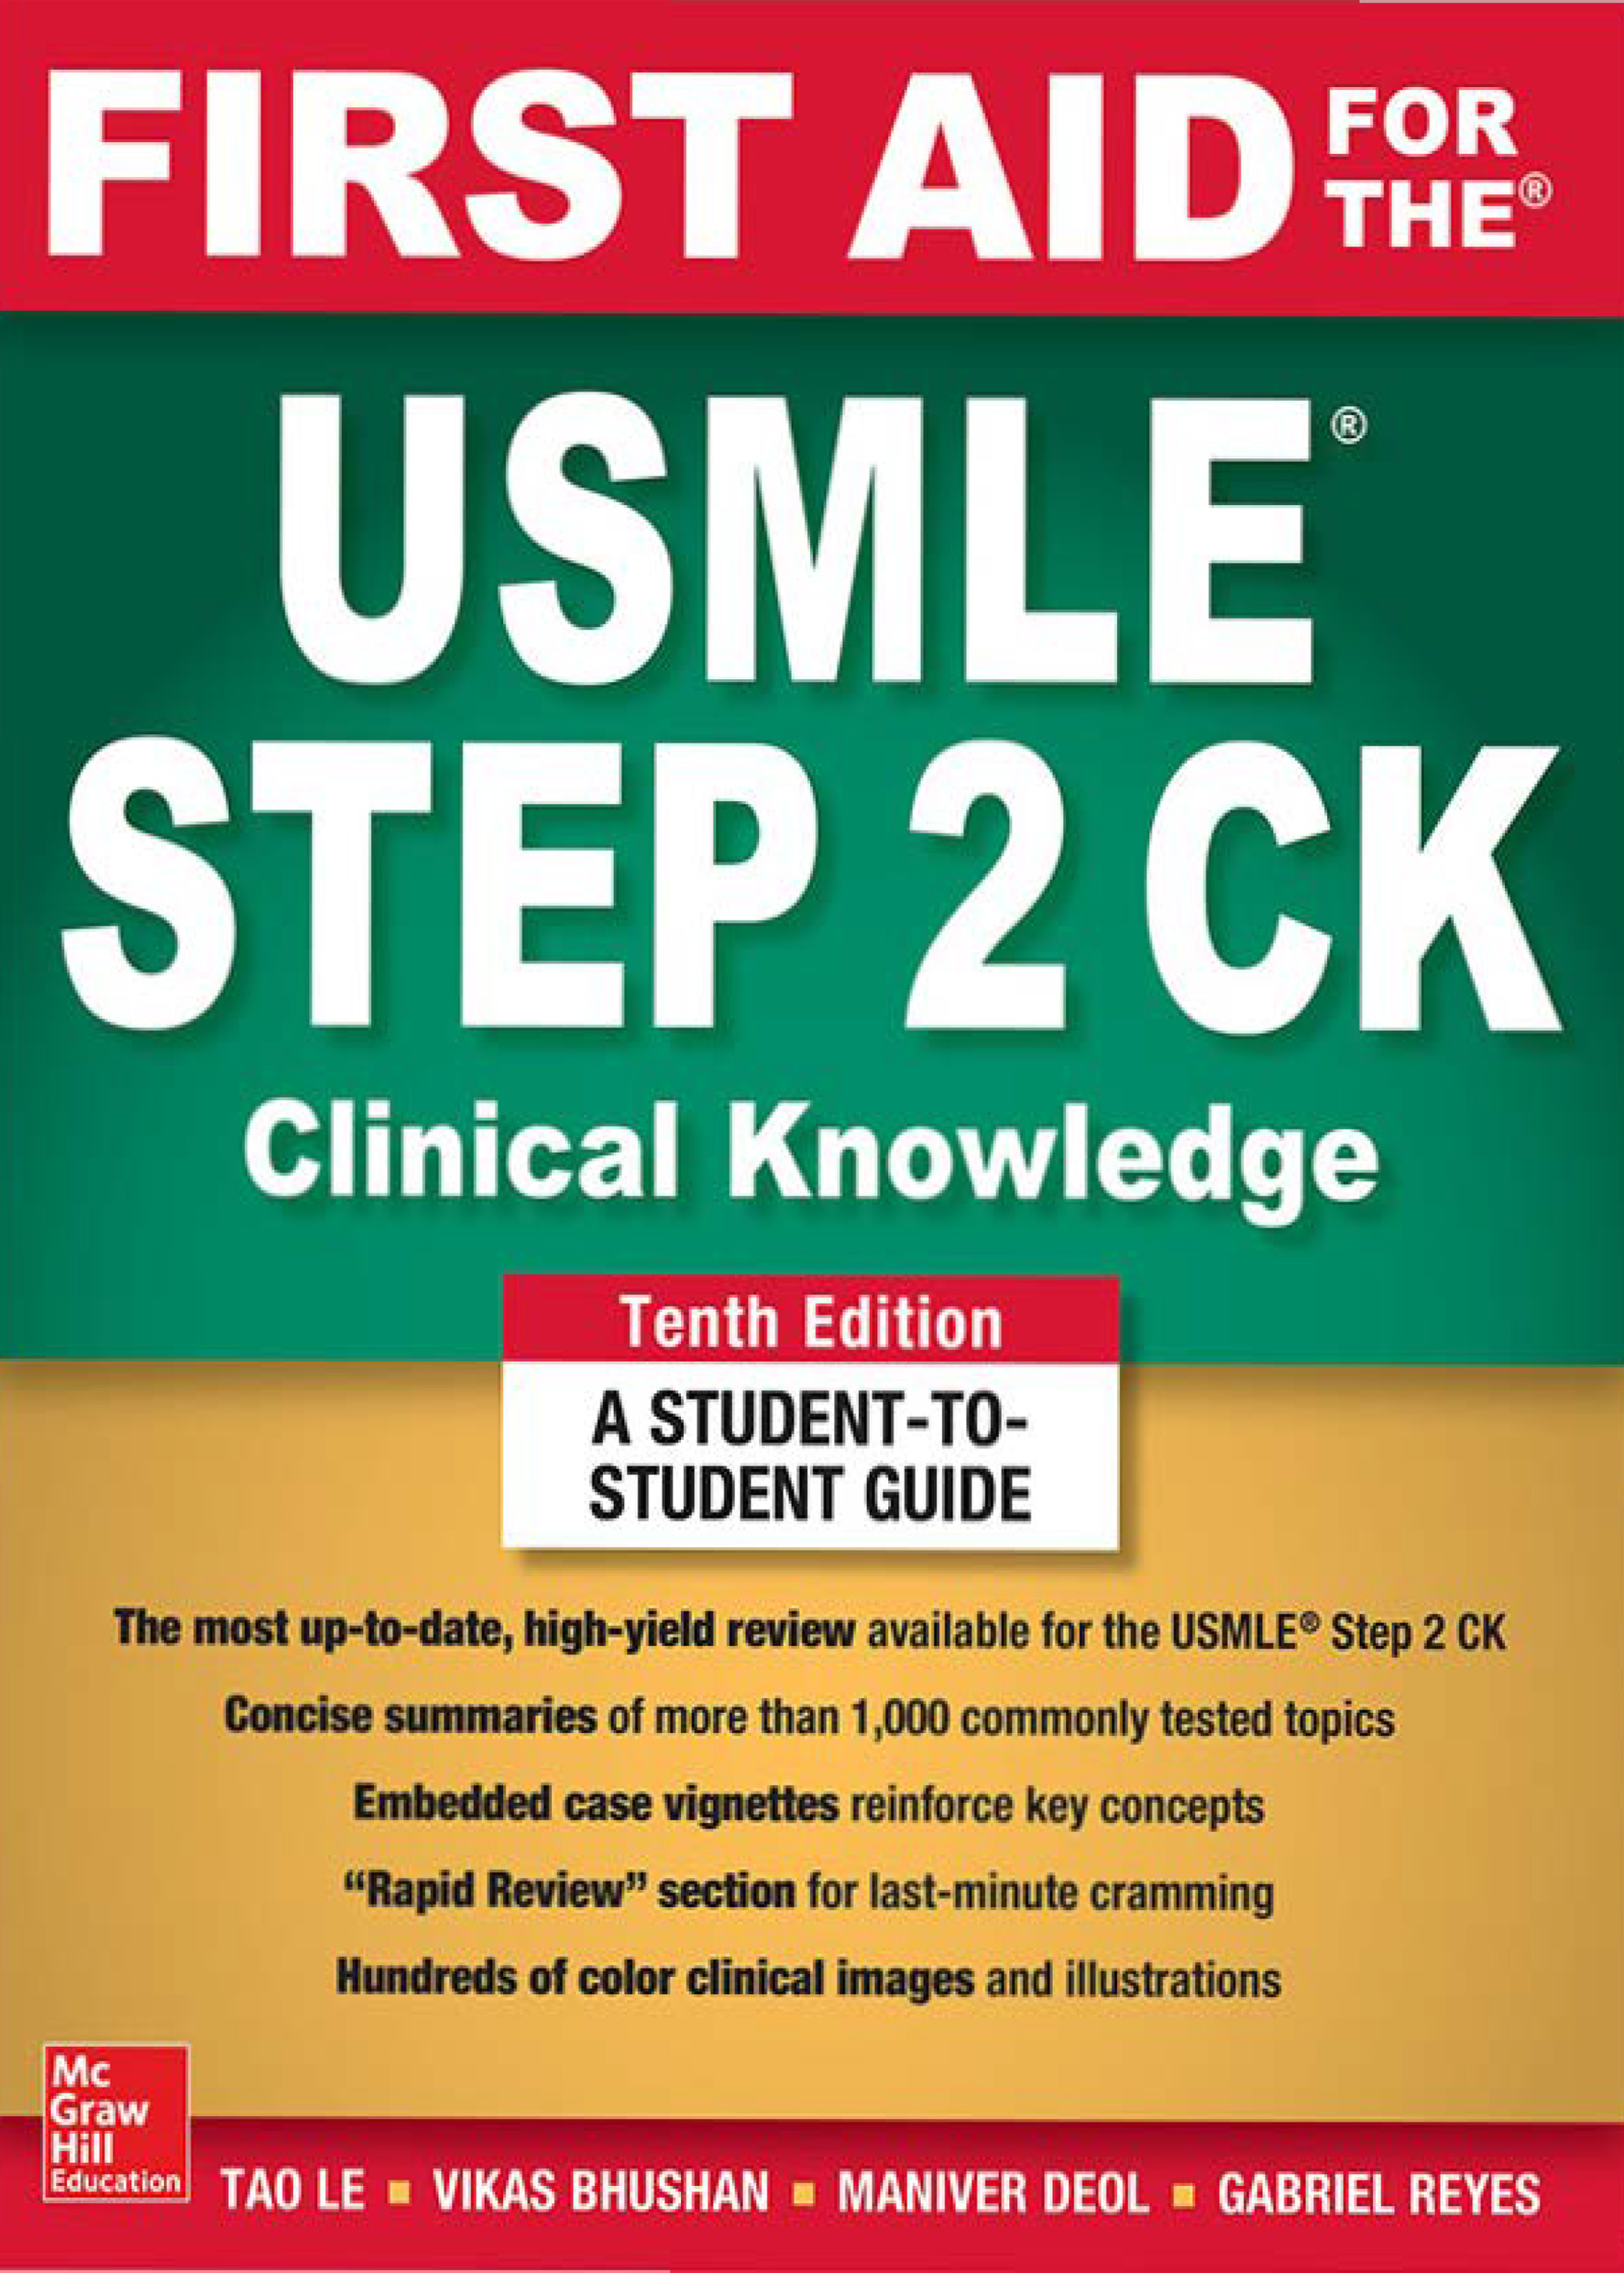 First AID For The USMLE Step 2 CK Tenth Edition